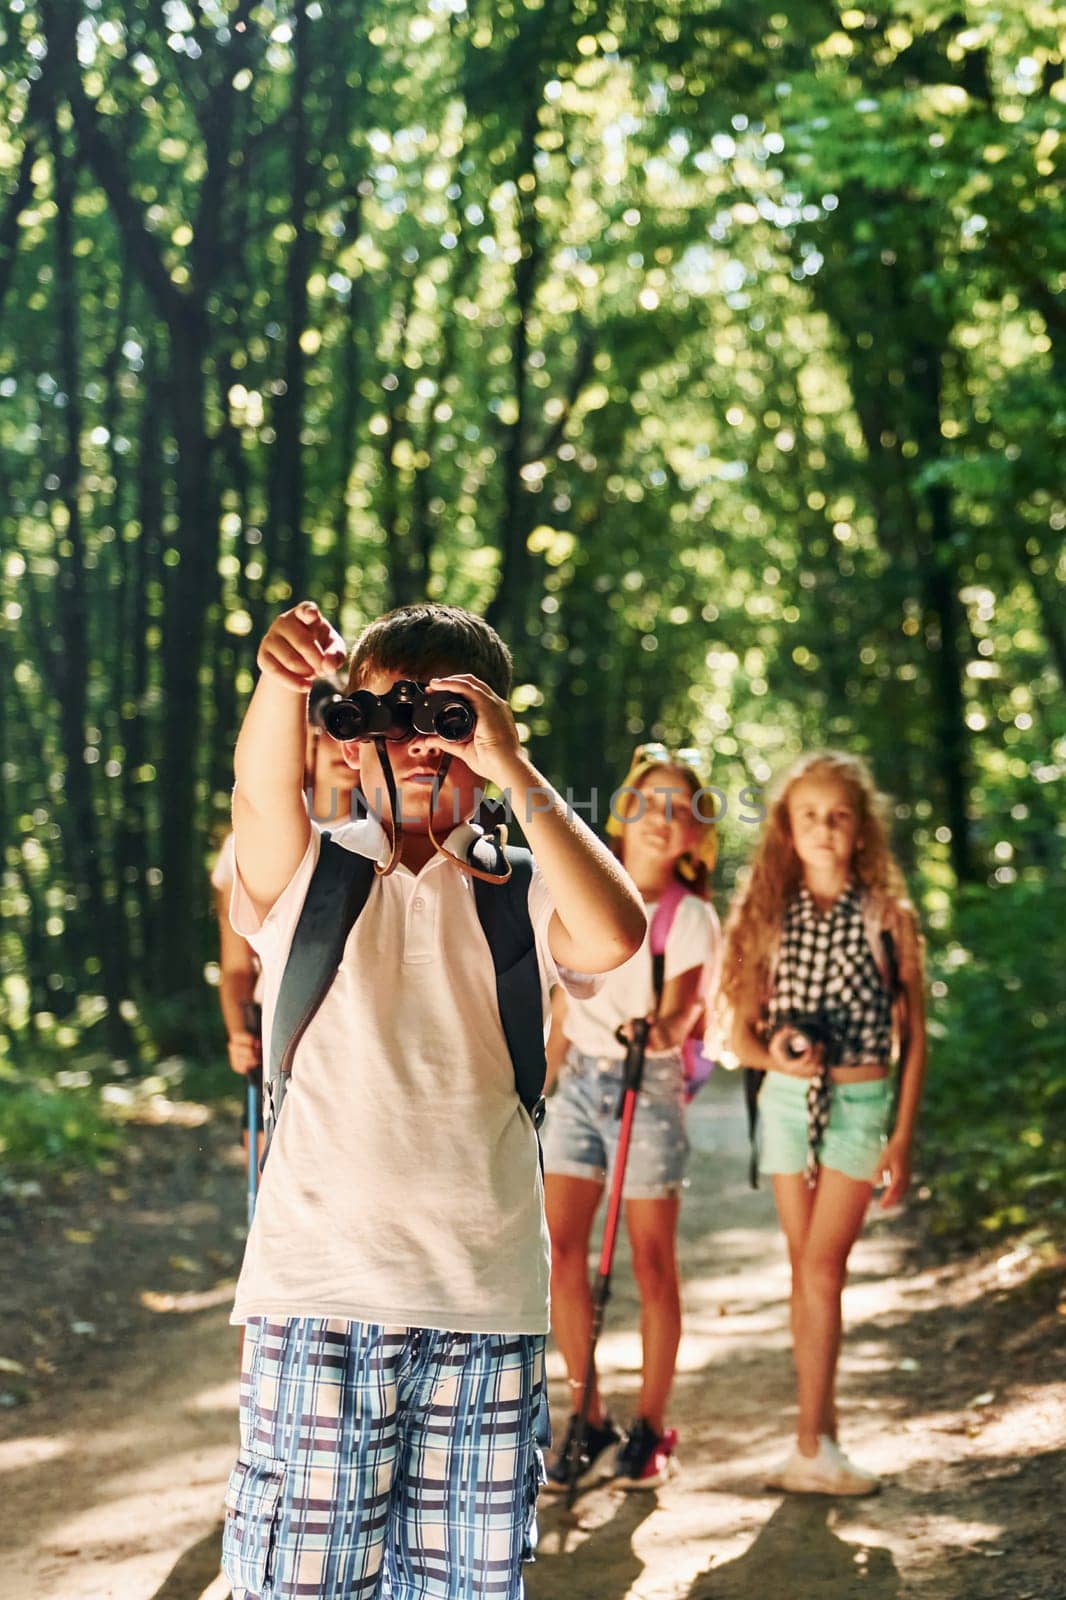 Beautiful nature. Kids strolling in the forest with travel equipment.